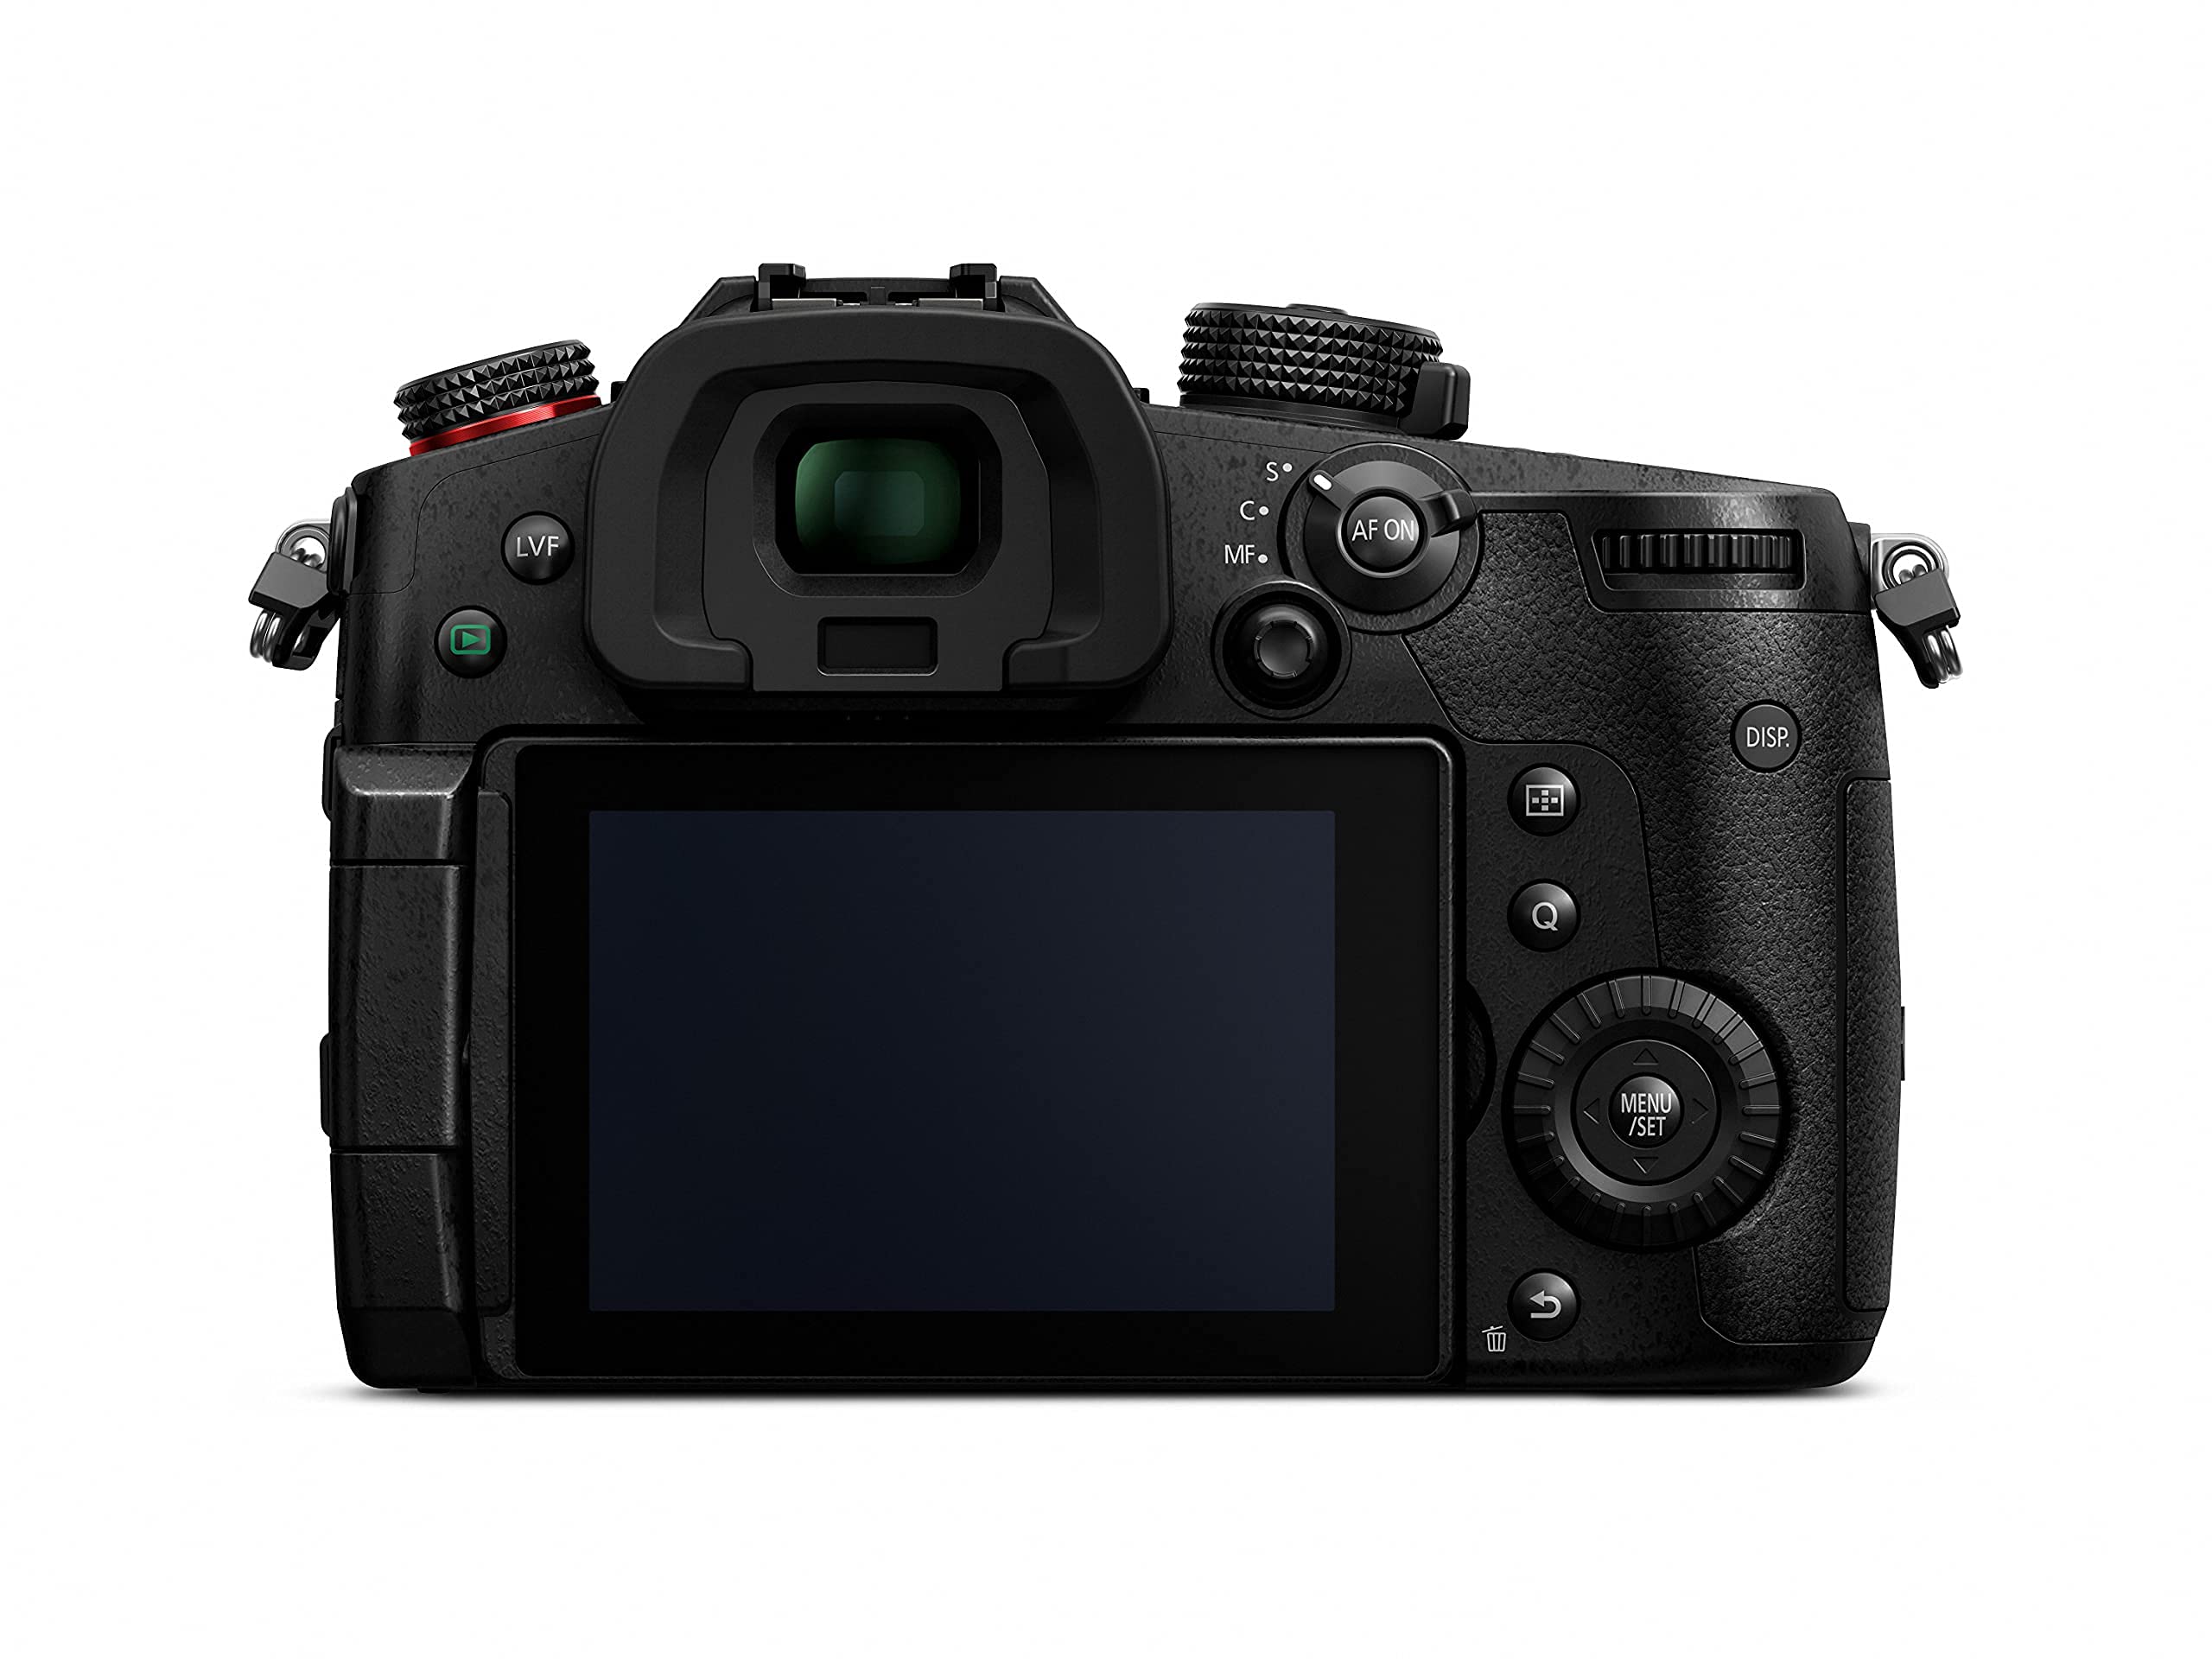 Panasonic LUMIX GH5M2, 20.3MP Mirrorless Micro Four Thirds Camera with Live Streaming, 4K 4:2:2 10-Bit Video, 5-Axis Image Stabilizer, 12-60mm F2.8-4.0 Leica Lens DC-GH5M2LK Black